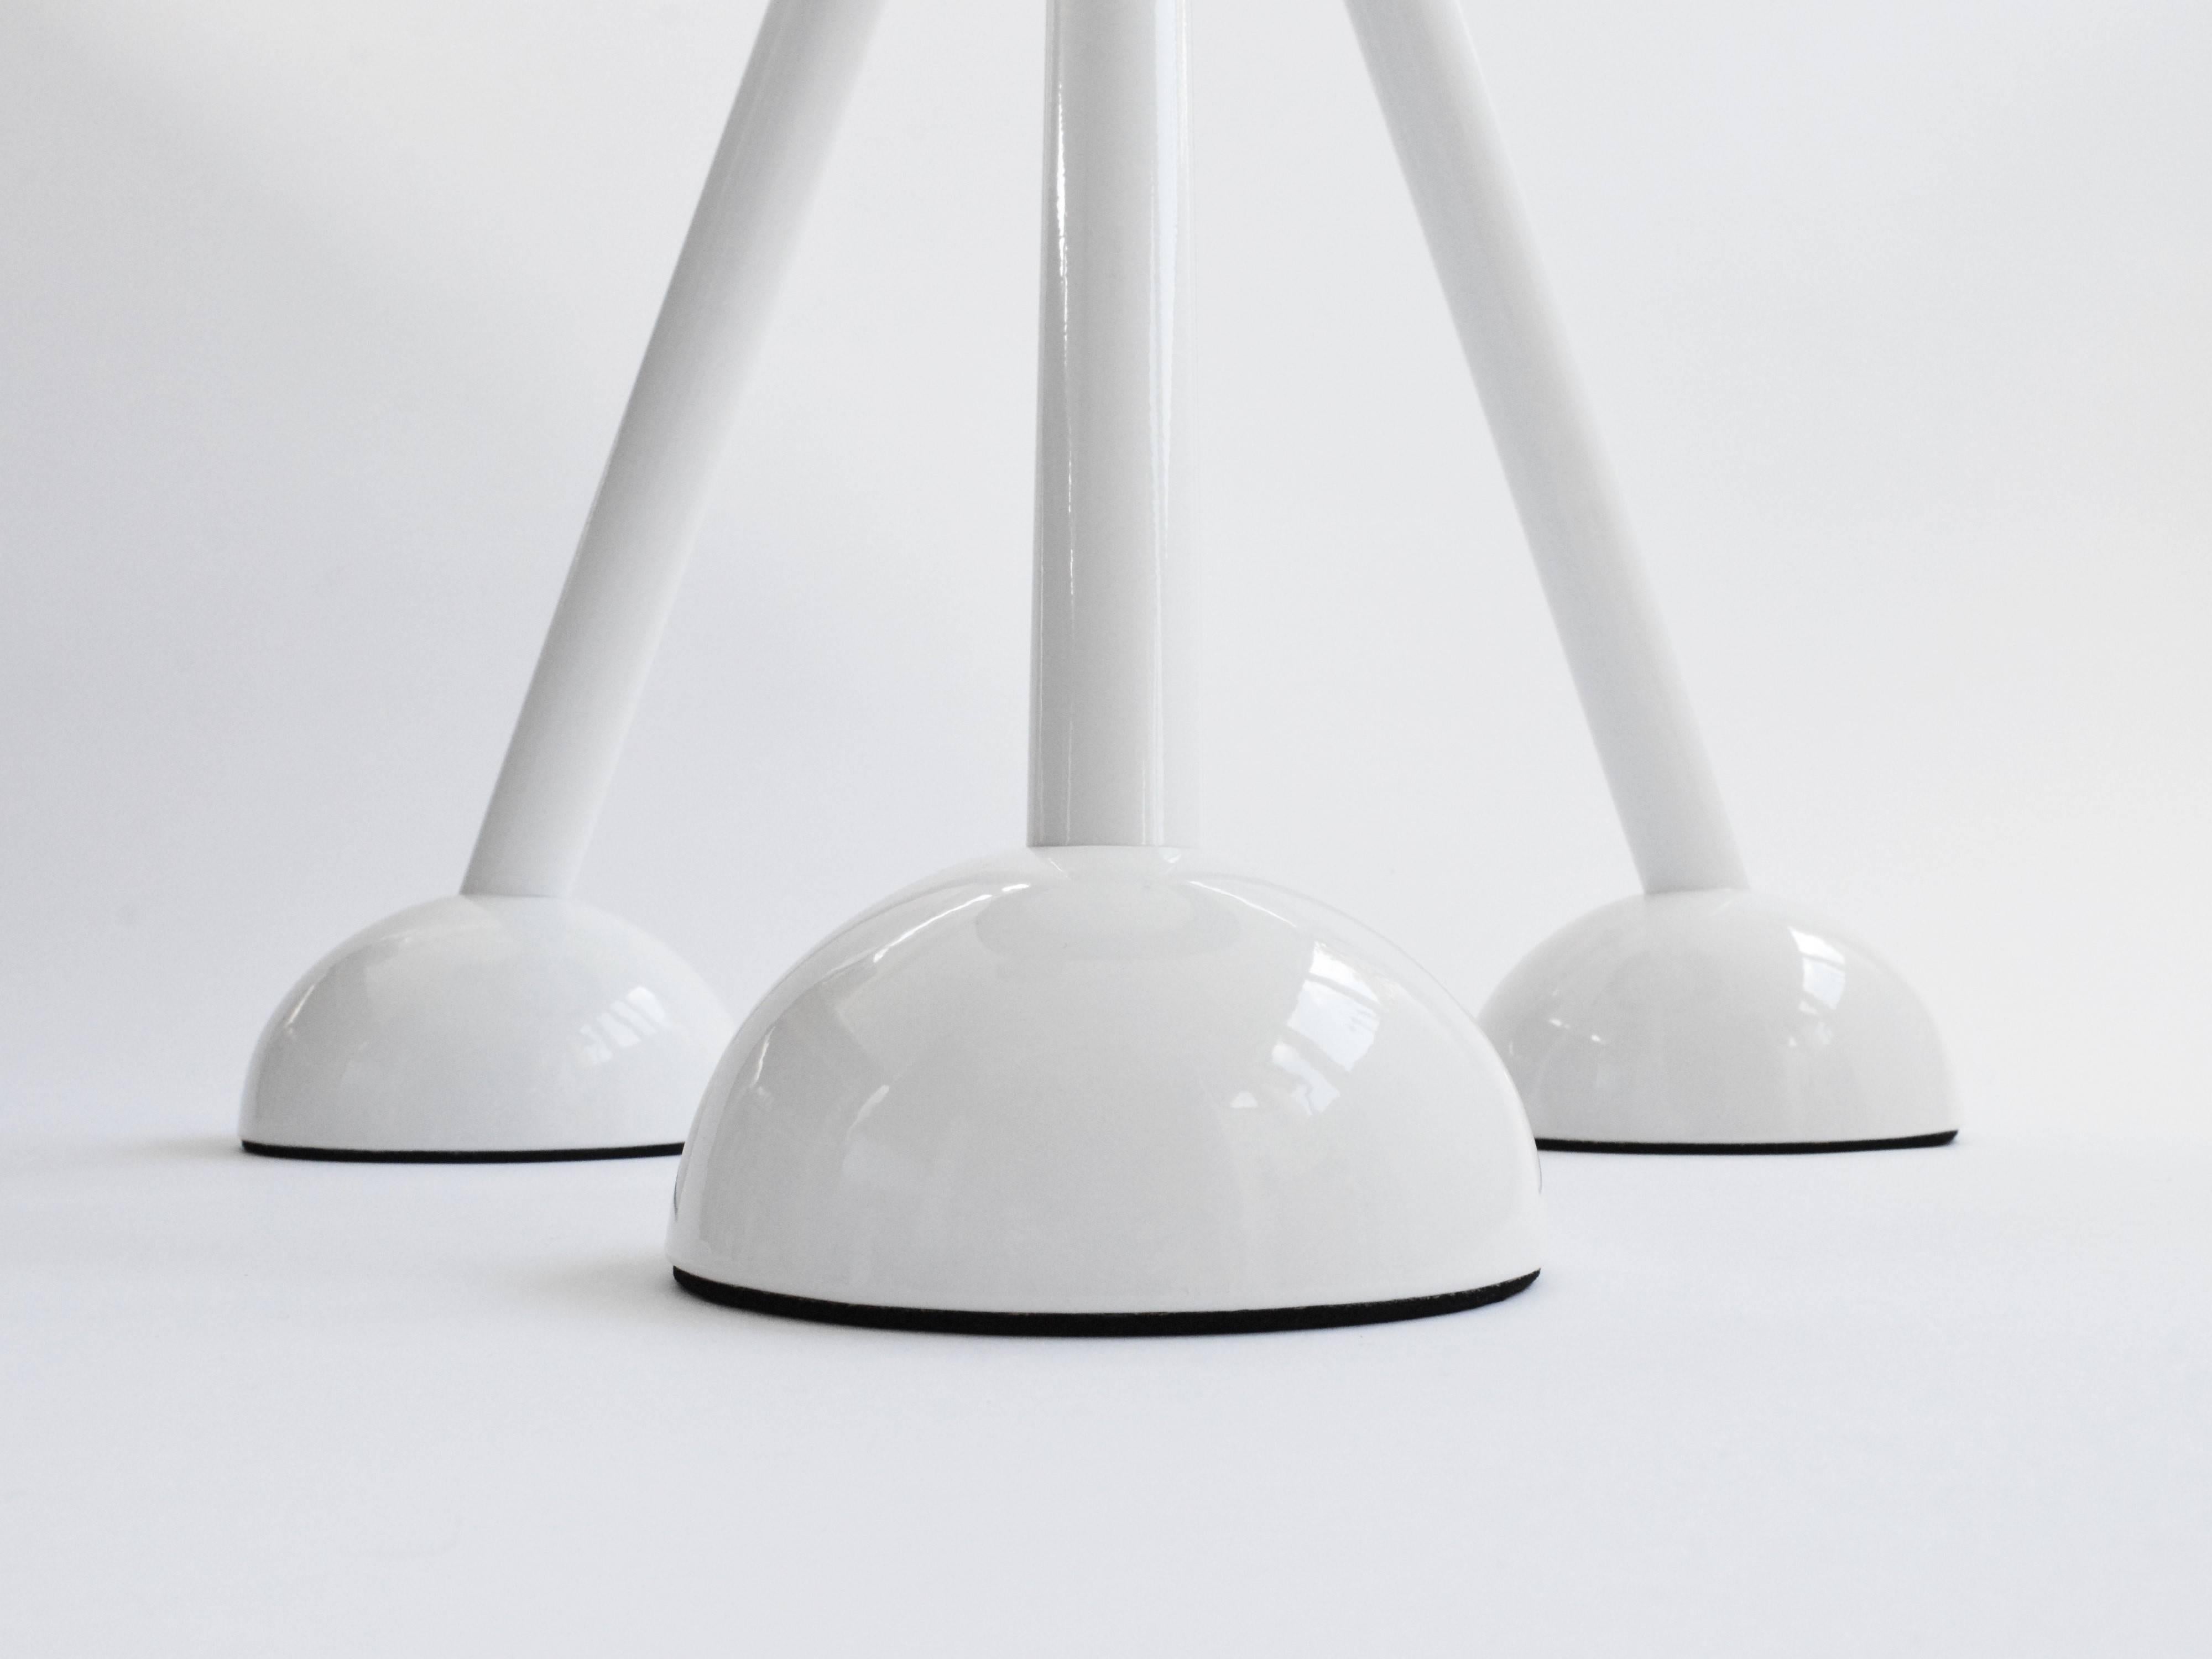 Contemporary stool table designed and made by independent product and furniture designer Connor Holland.

The Saturn Tripod is part of the Saturn Six range, a series of designs inspired by space exploration and the Saturn V rocket. The Saturn Tripod